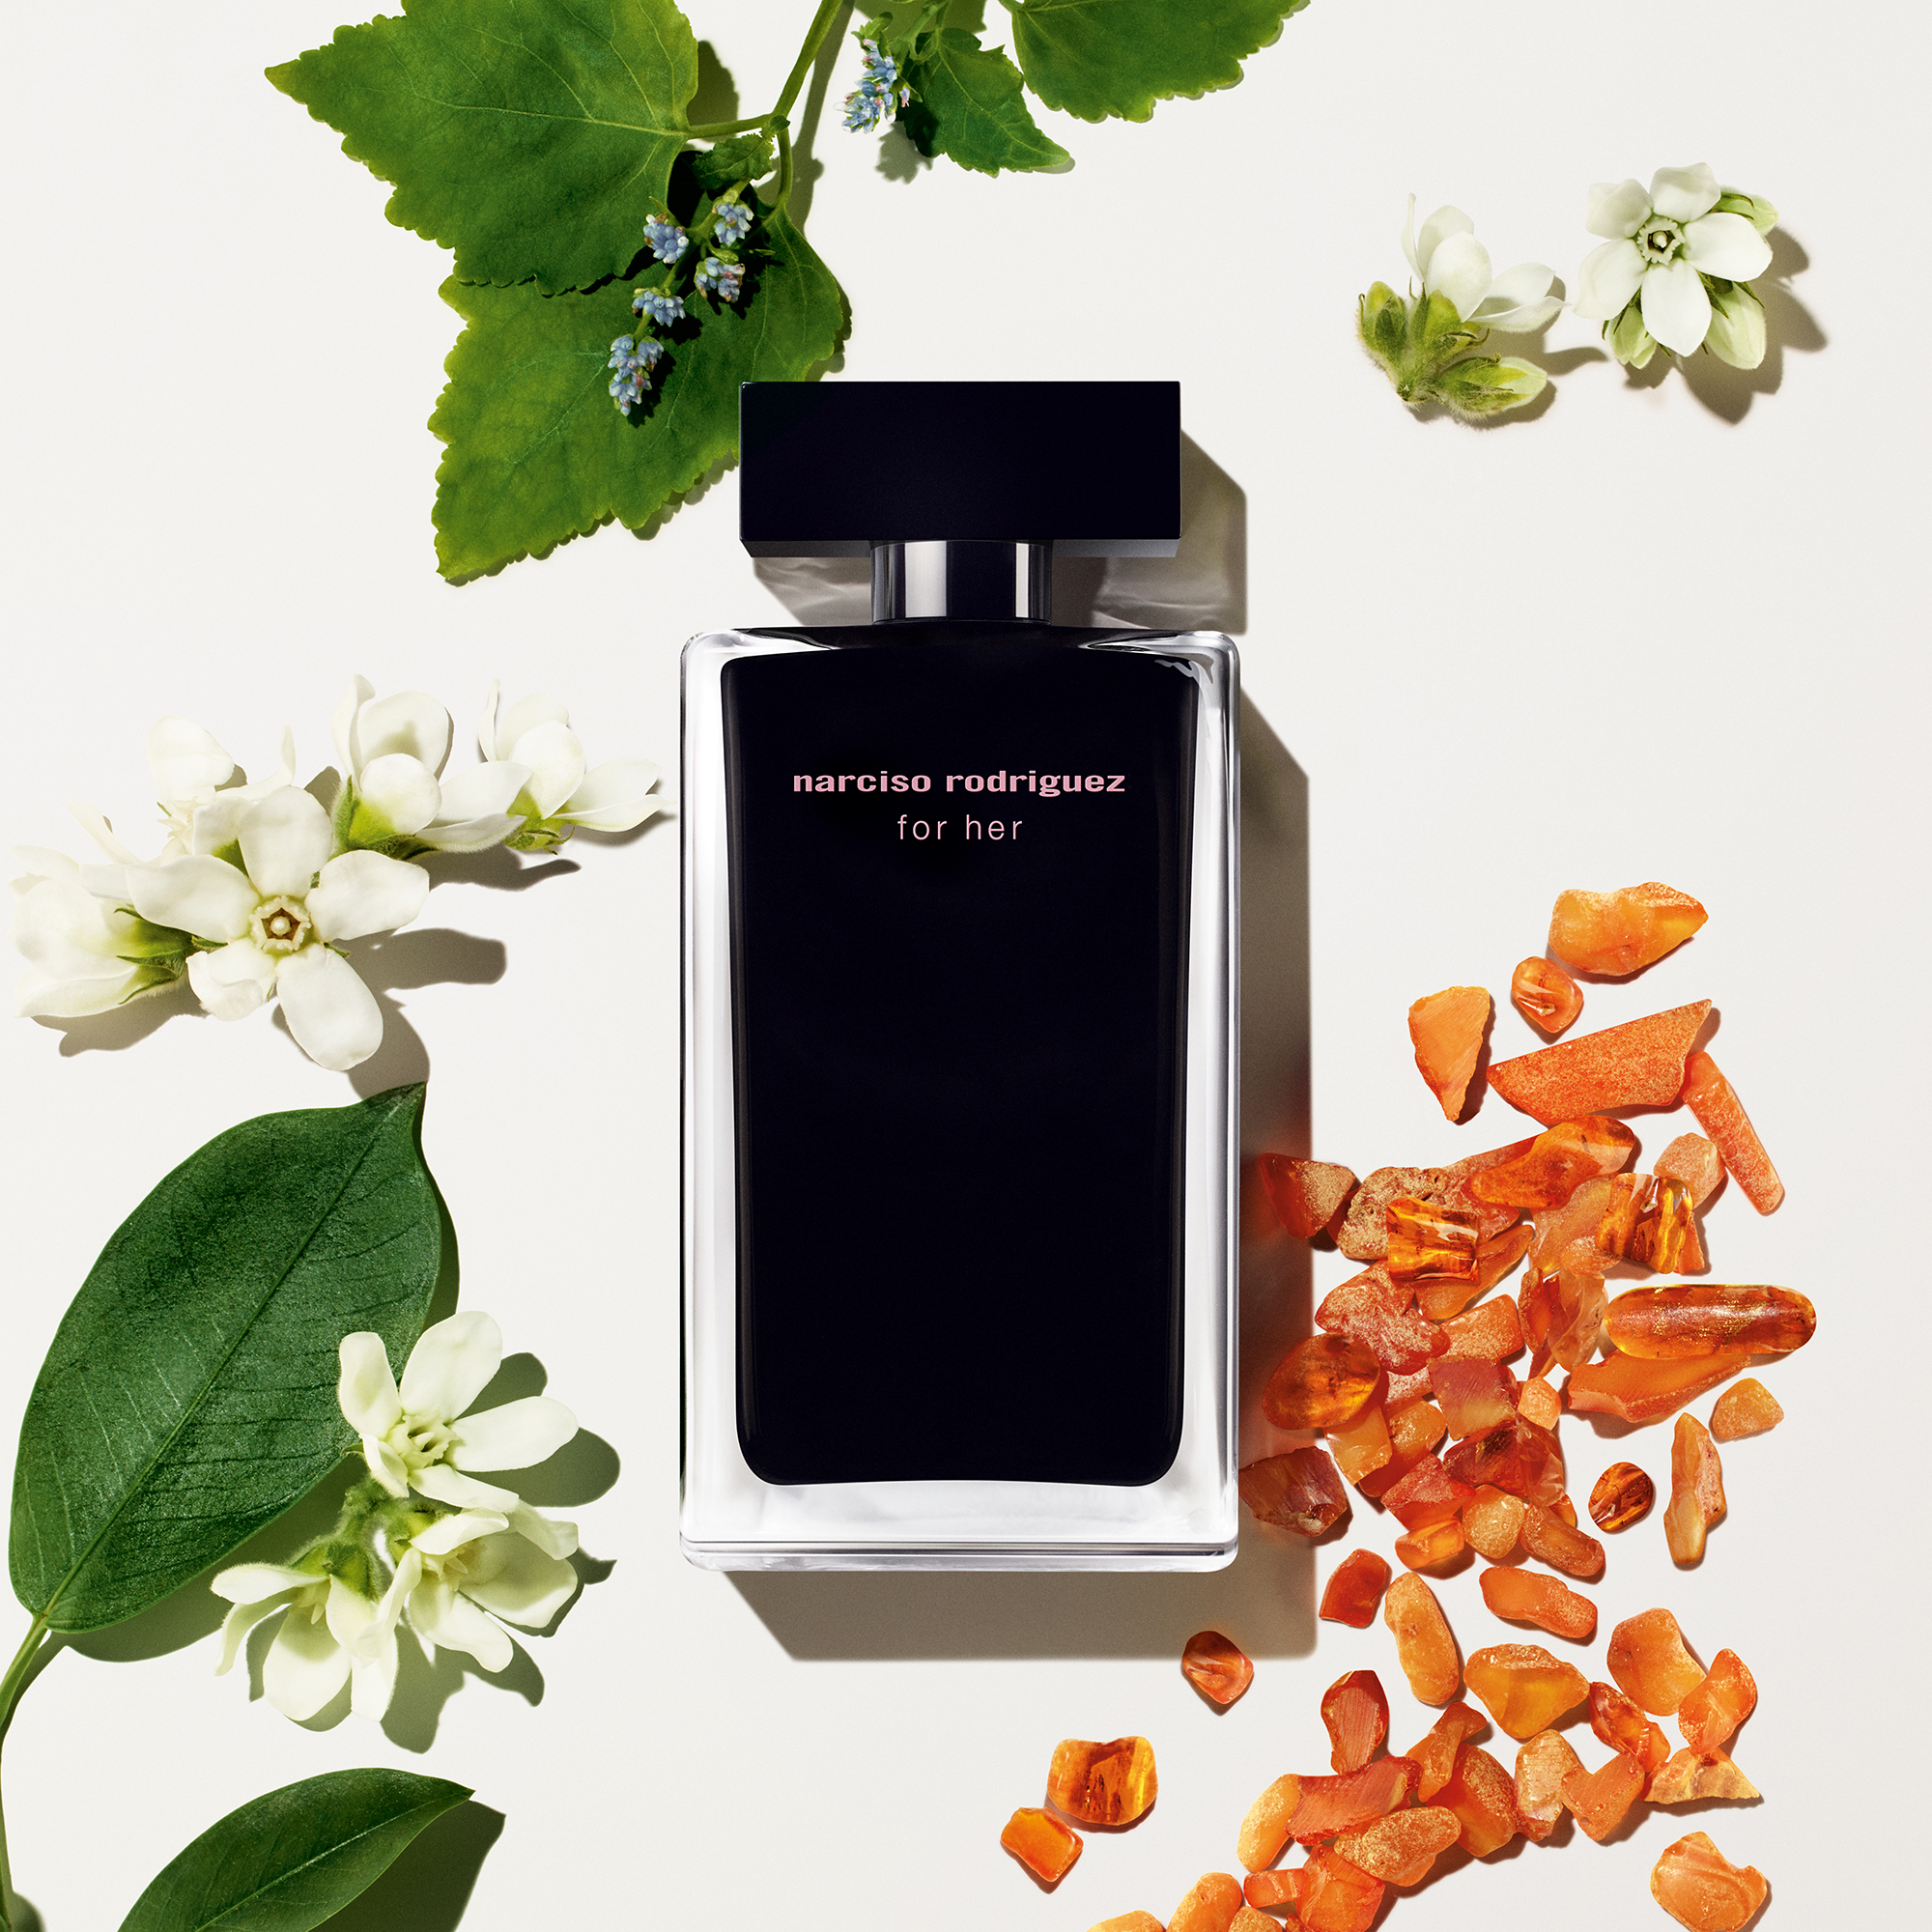 Narciso Rodríguez For Her perfume